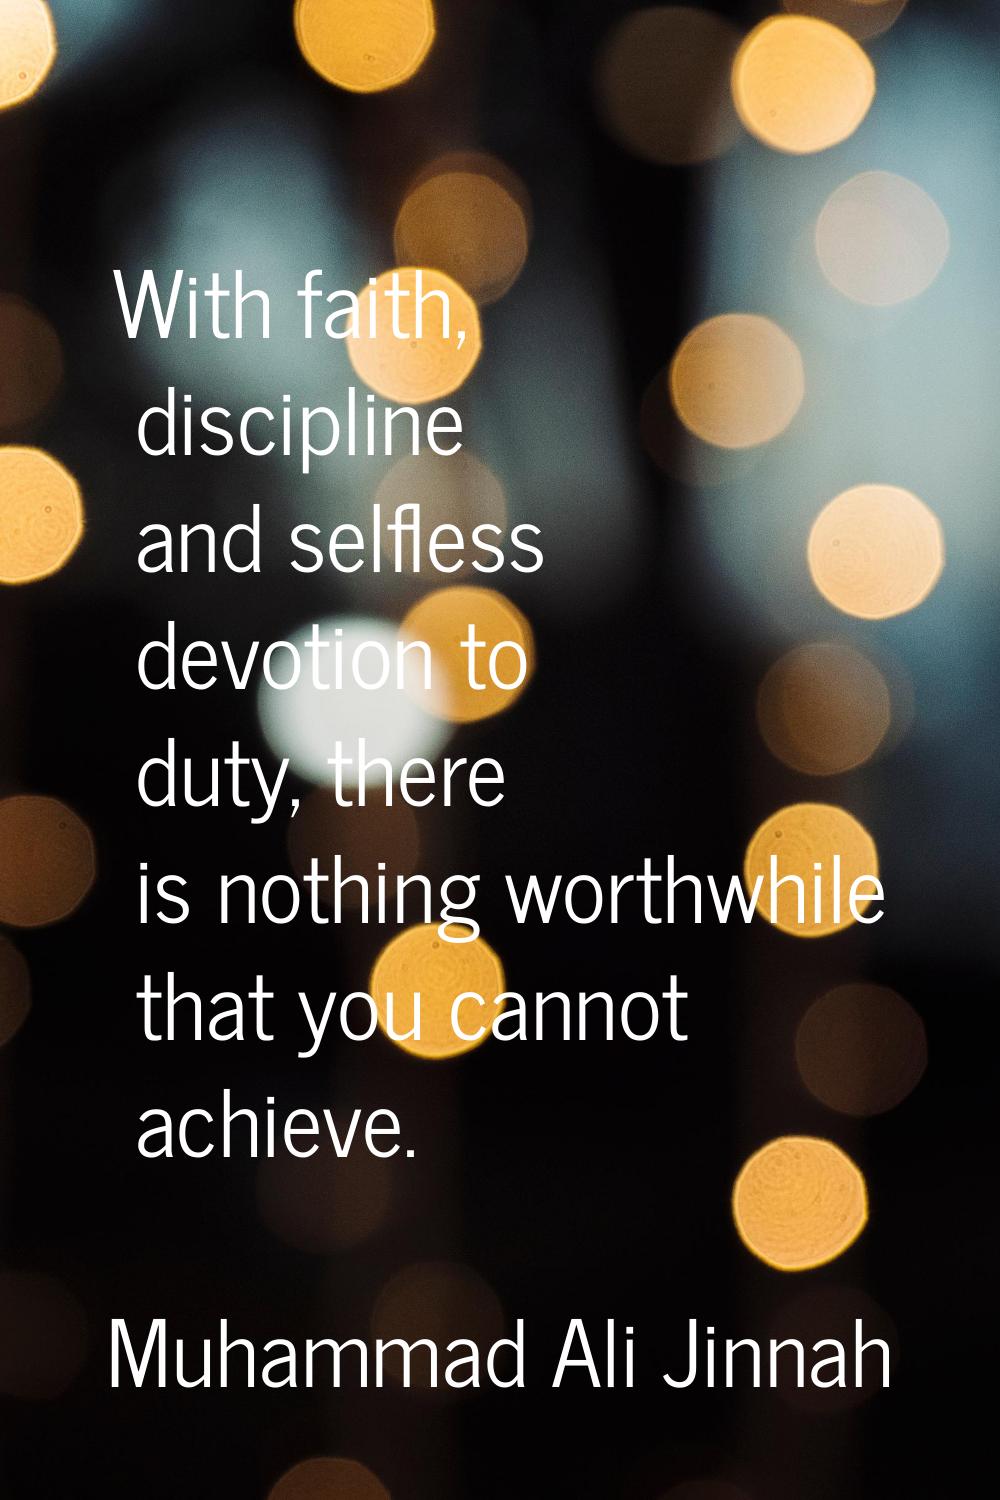 With faith, discipline and selfless devotion to duty, there is nothing worthwhile that you cannot a